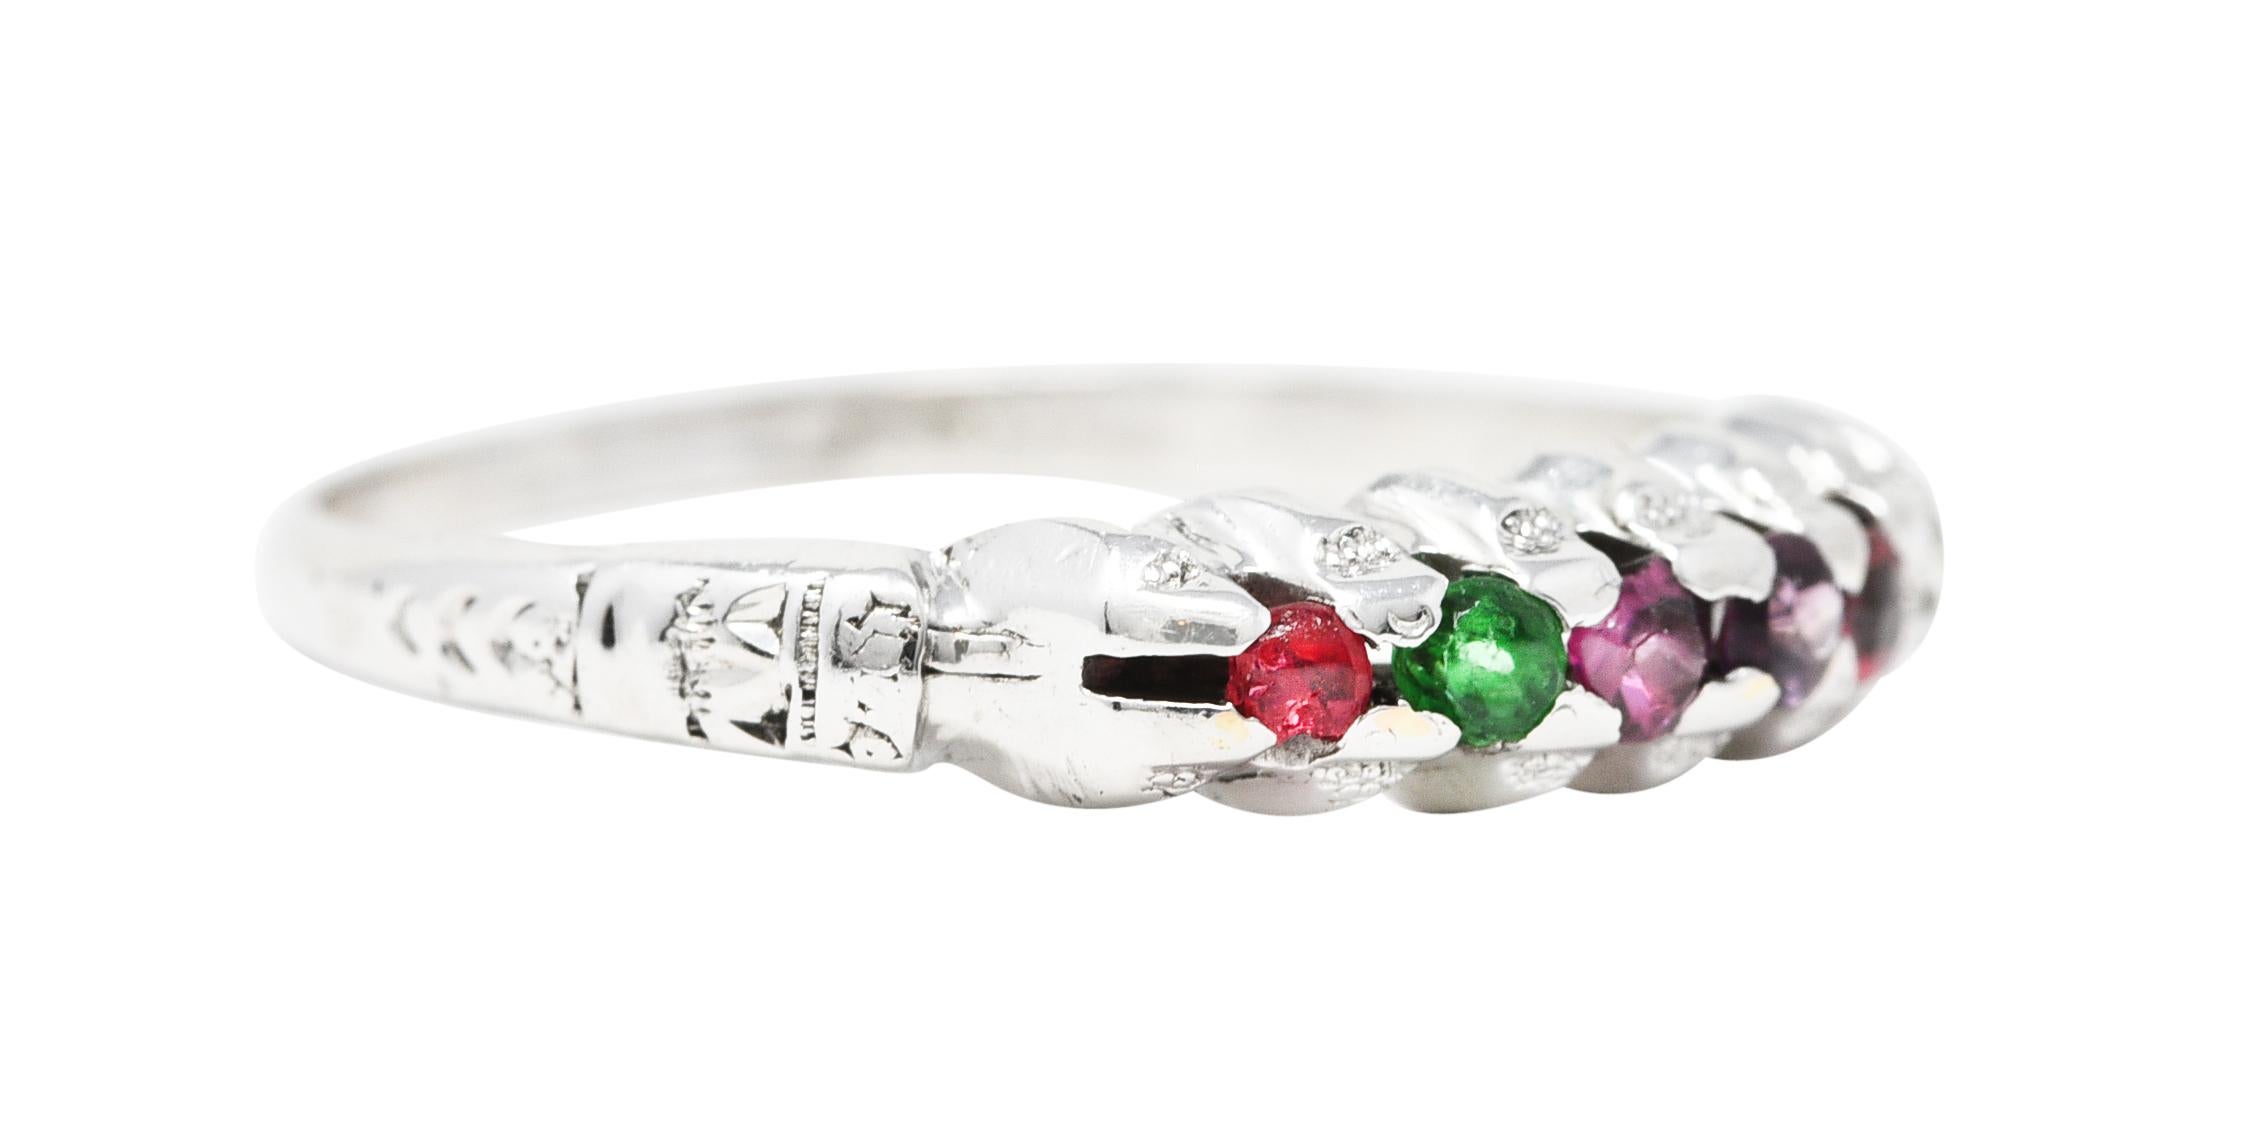 Designed as an acrostic style ring with round cut ruby, emerald, garnet, amethyst ruby, and diamond. Prong set to front - arranged to spell 'Regard', a common motif for period engagement rings. Accented by a grooved profile with engraved floral